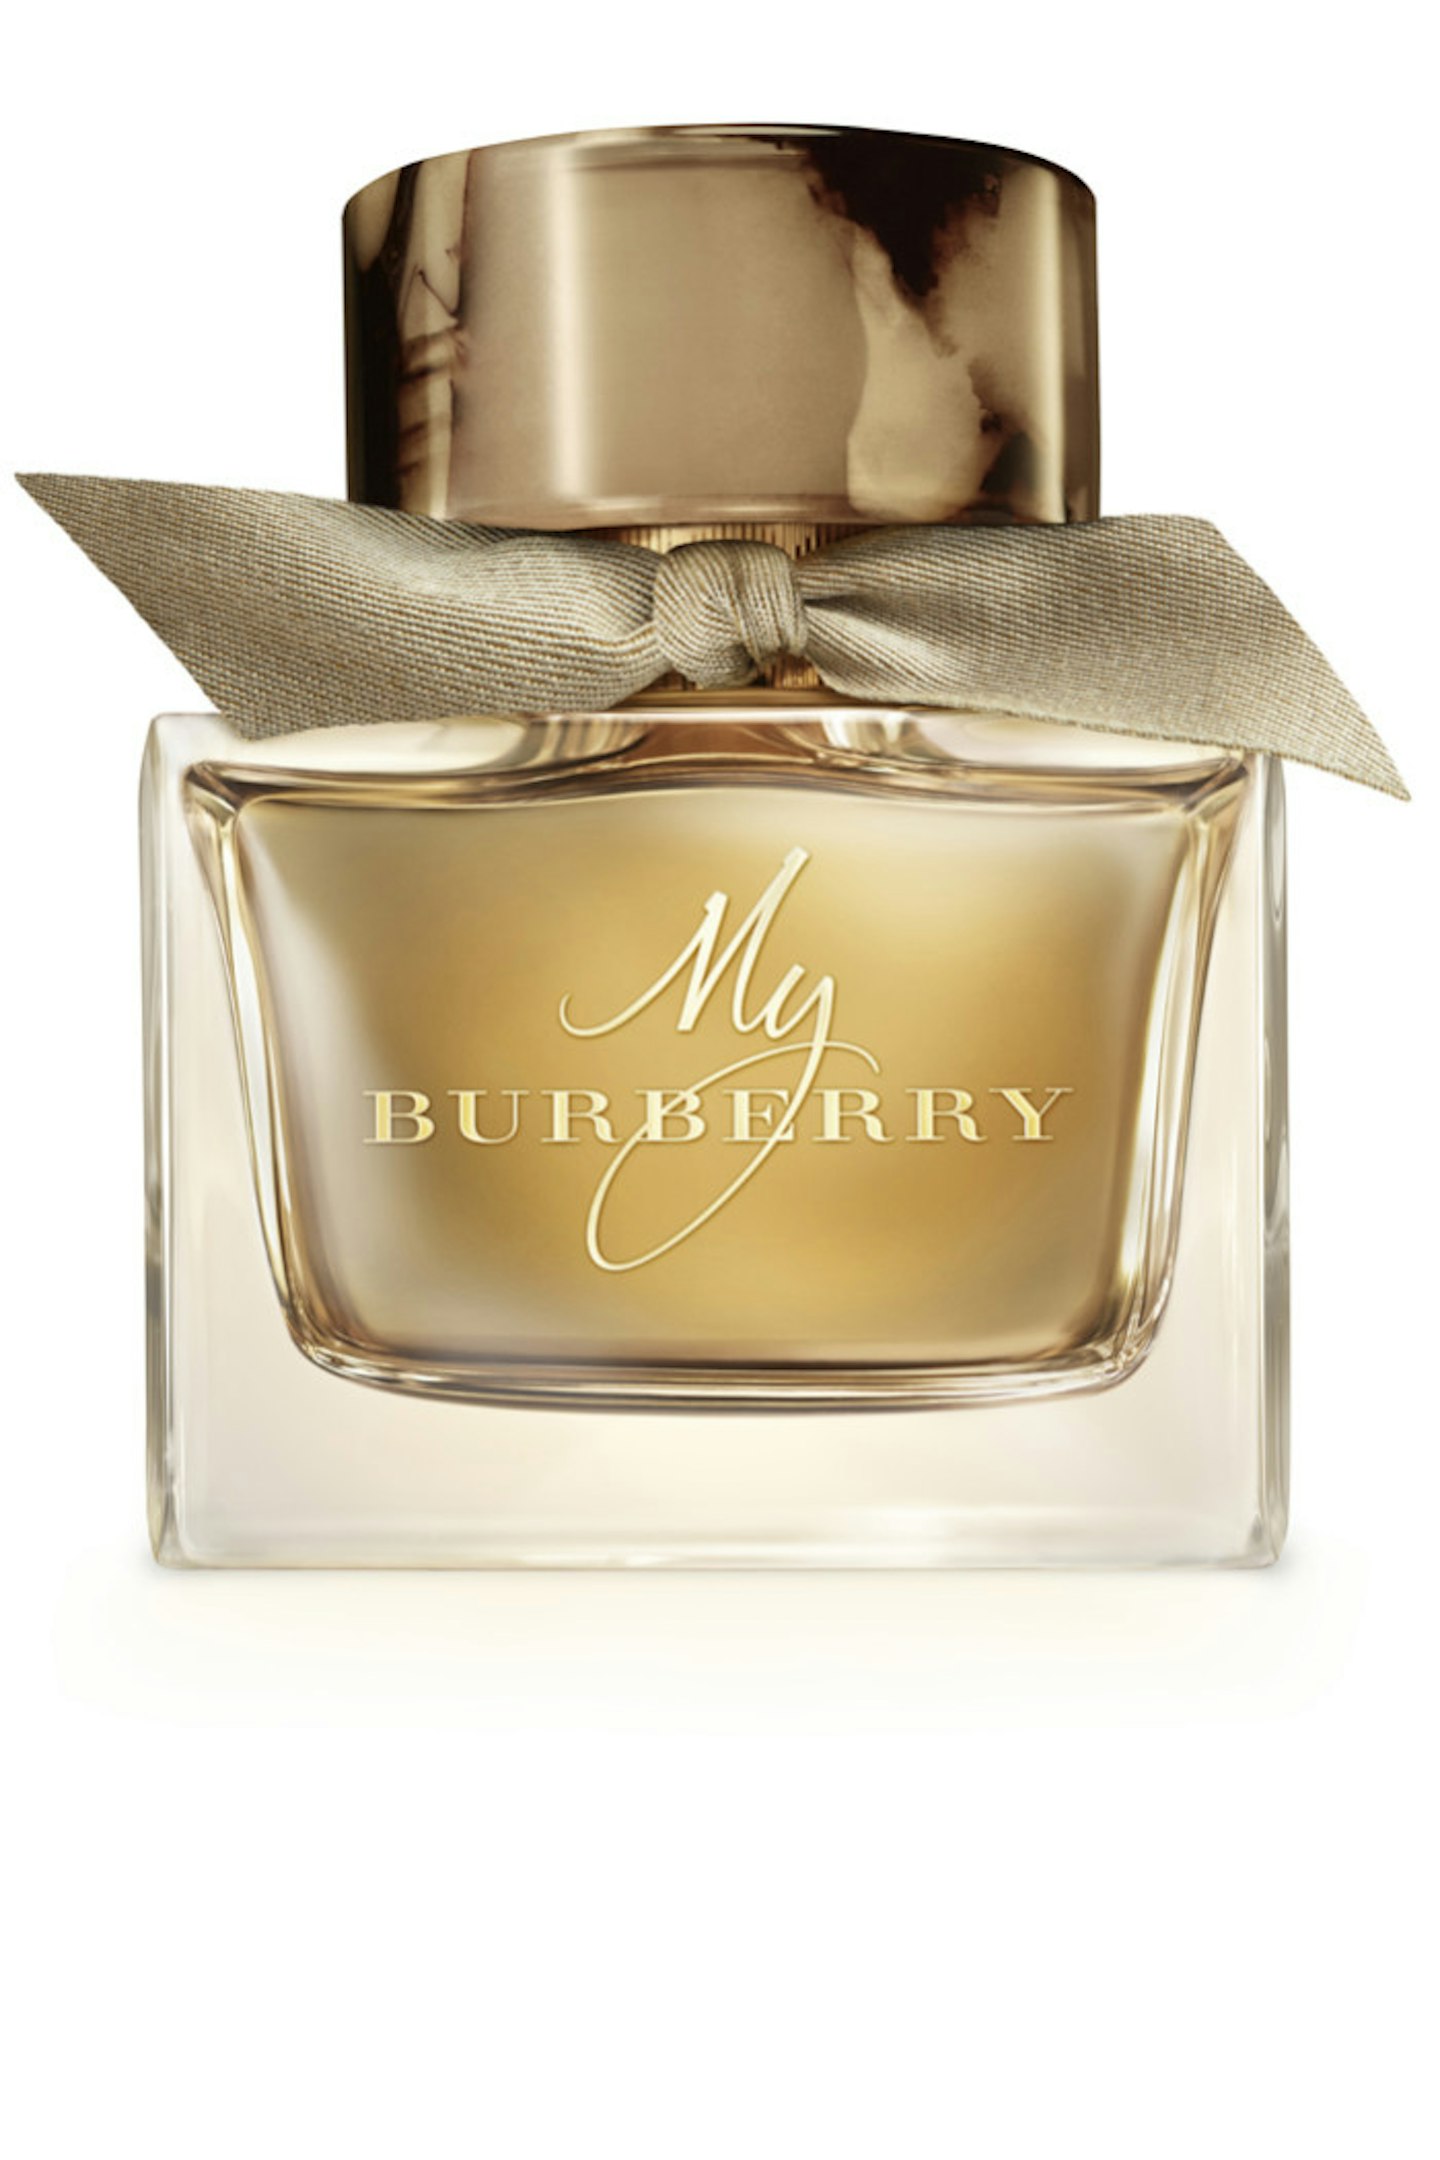 Jill Warren from Pout Out Proud, My Burberry Fragrance, from £45.00, Burberry